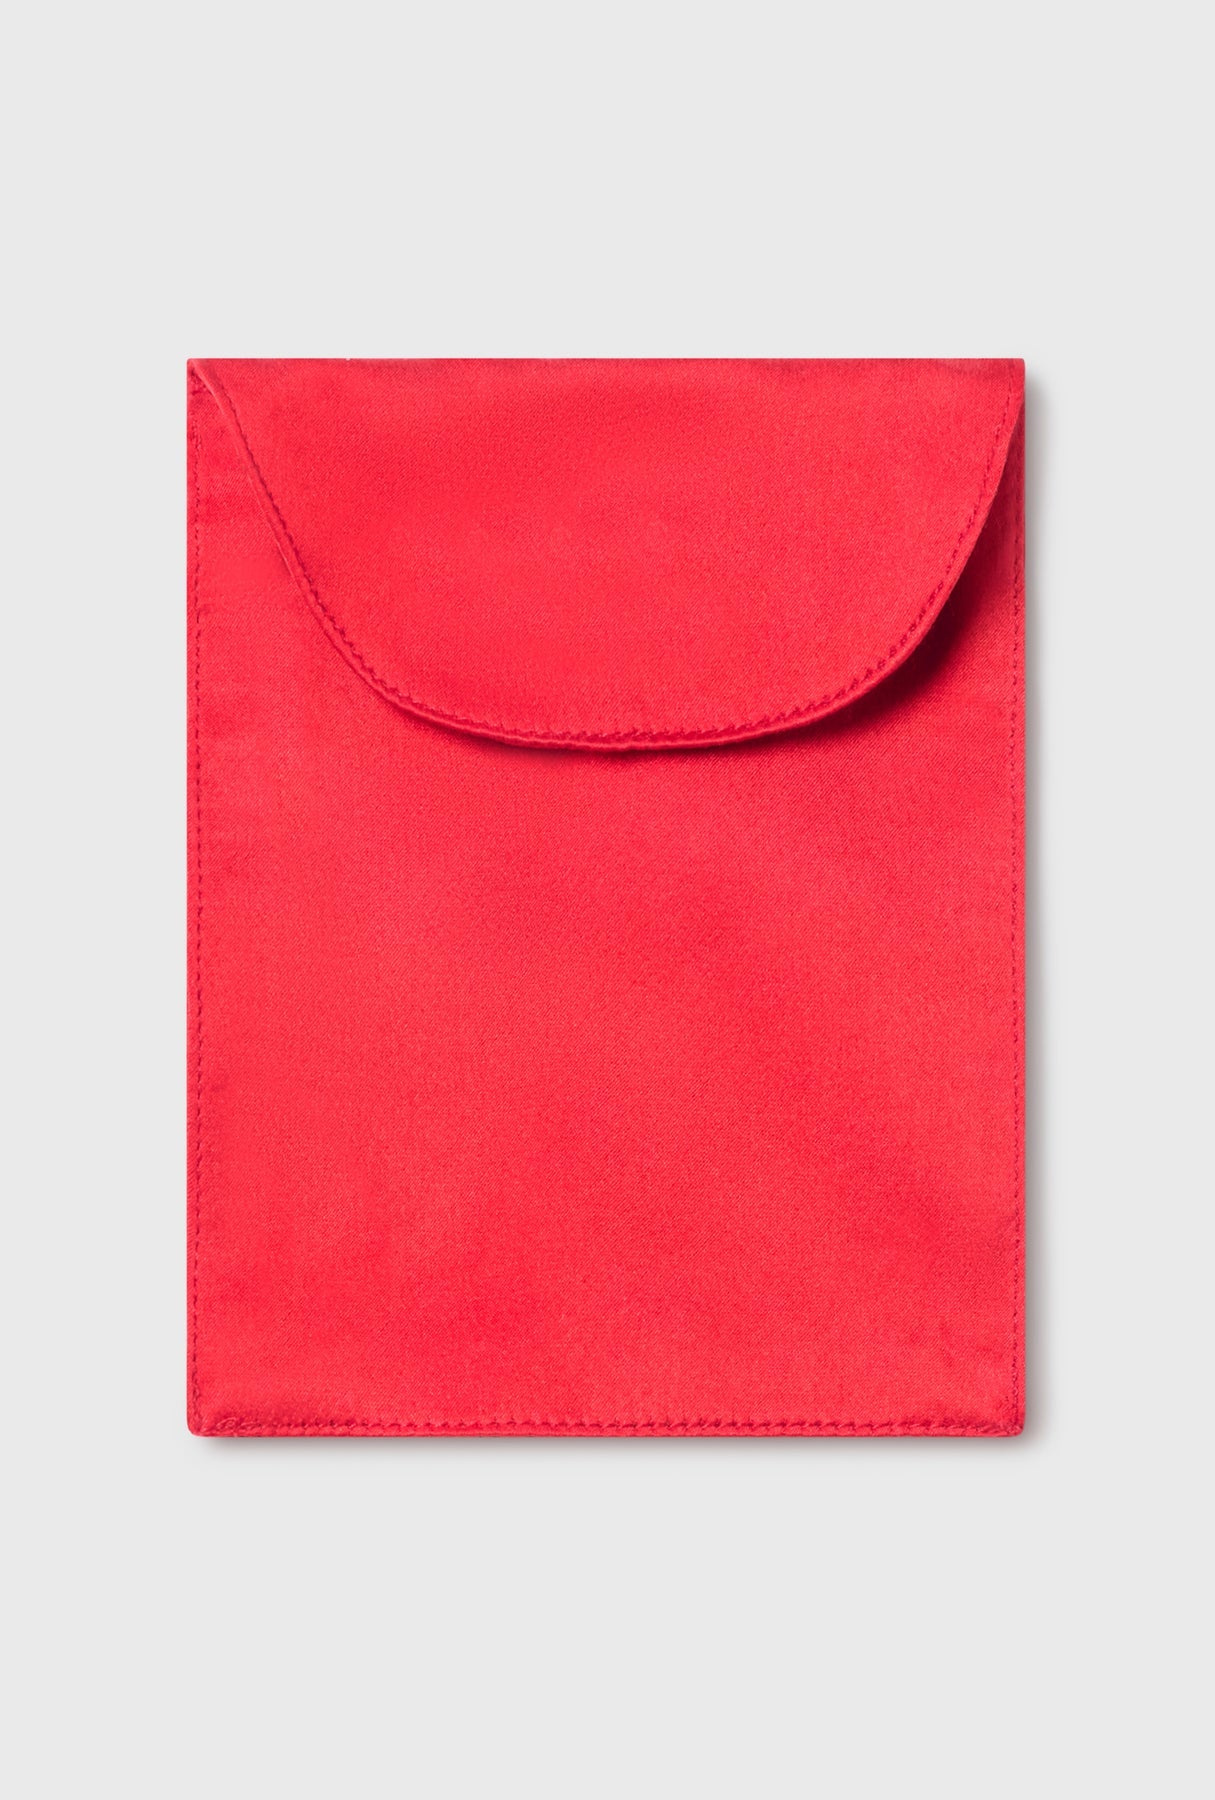 Silk Laundry | Money Pouch - Year Of The Dragon